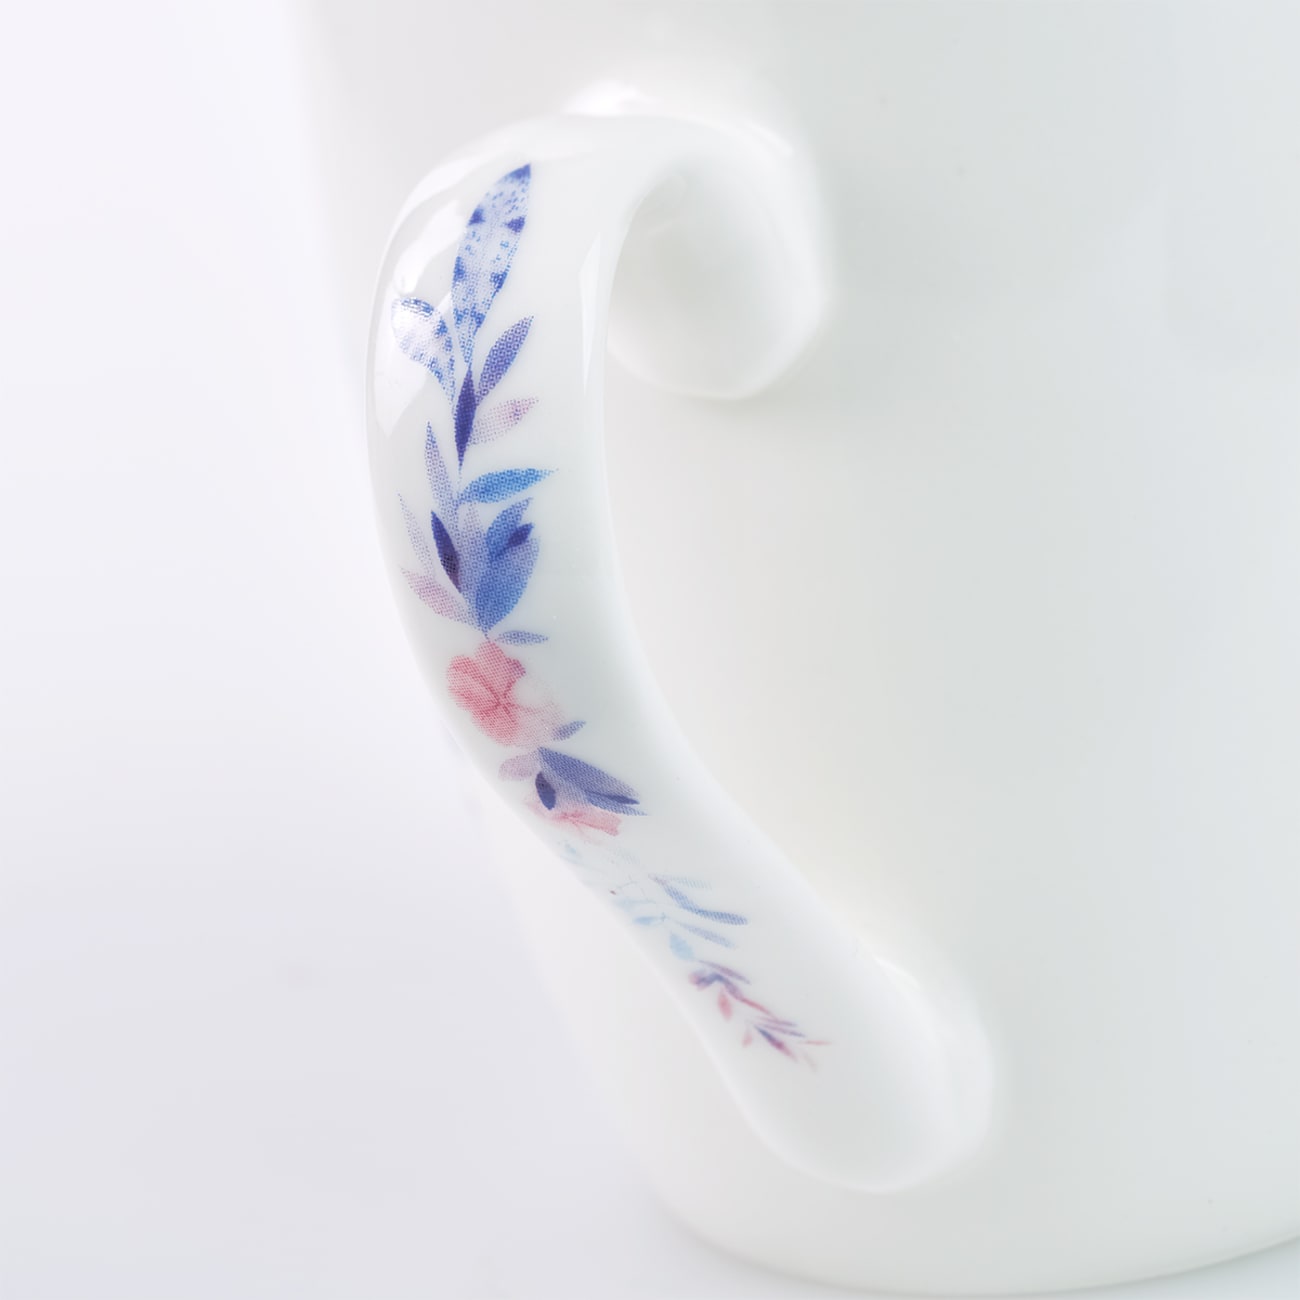 Ceramic Mug: My Grace is Sufficient For You, Pink/Purple Floral Wreath (2 Cor 12:9) Homeware